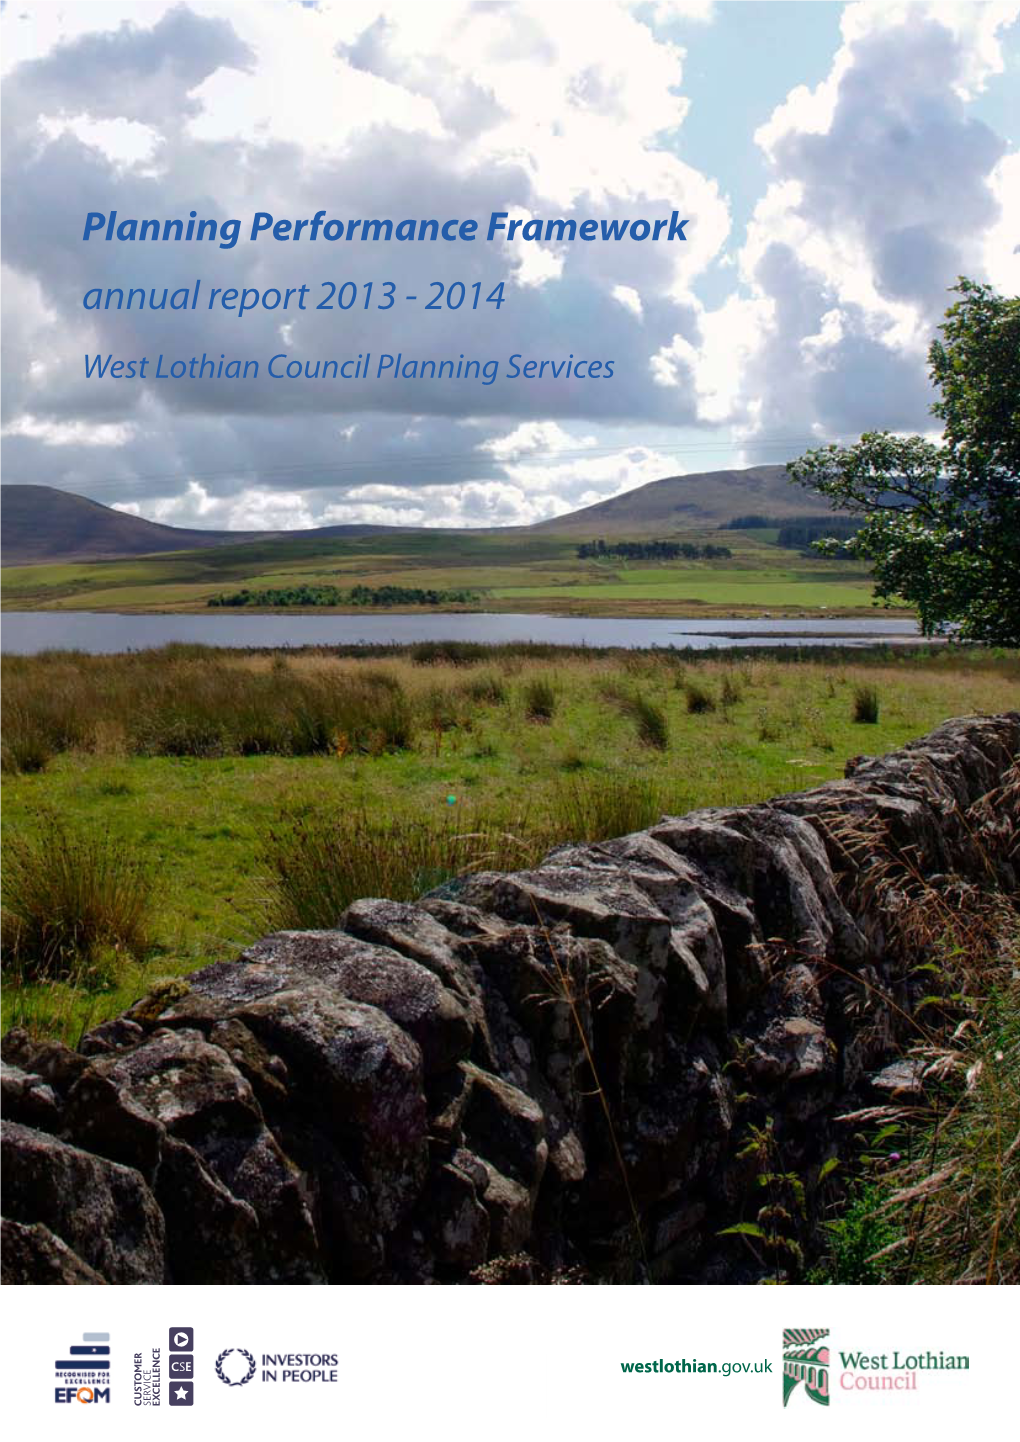 Planning Performance Framework Annual Report 2013 - 2014 West Lothian Council Planning Services